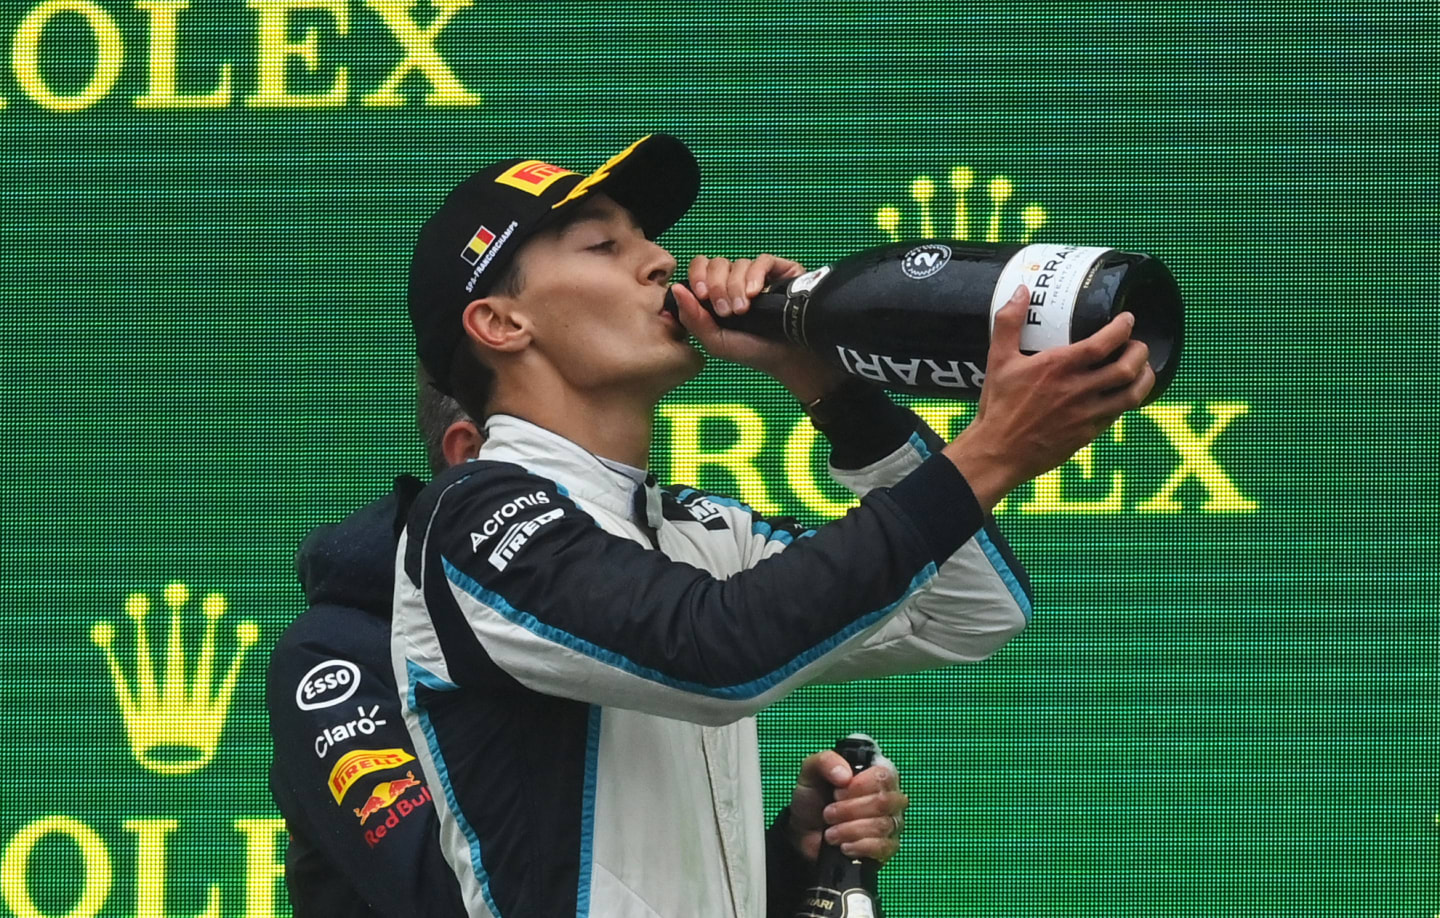 SPA, BELGIUM - AUGUST 29: Second placed George Russell of Great Britain and Williams celebrates on the podium during the F1 Grand Prix of Belgium at Circuit de Spa-Francorchamps on August 29, 2021 in Spa, Belgium. (Photo by Dan Mullan/Getty Images)